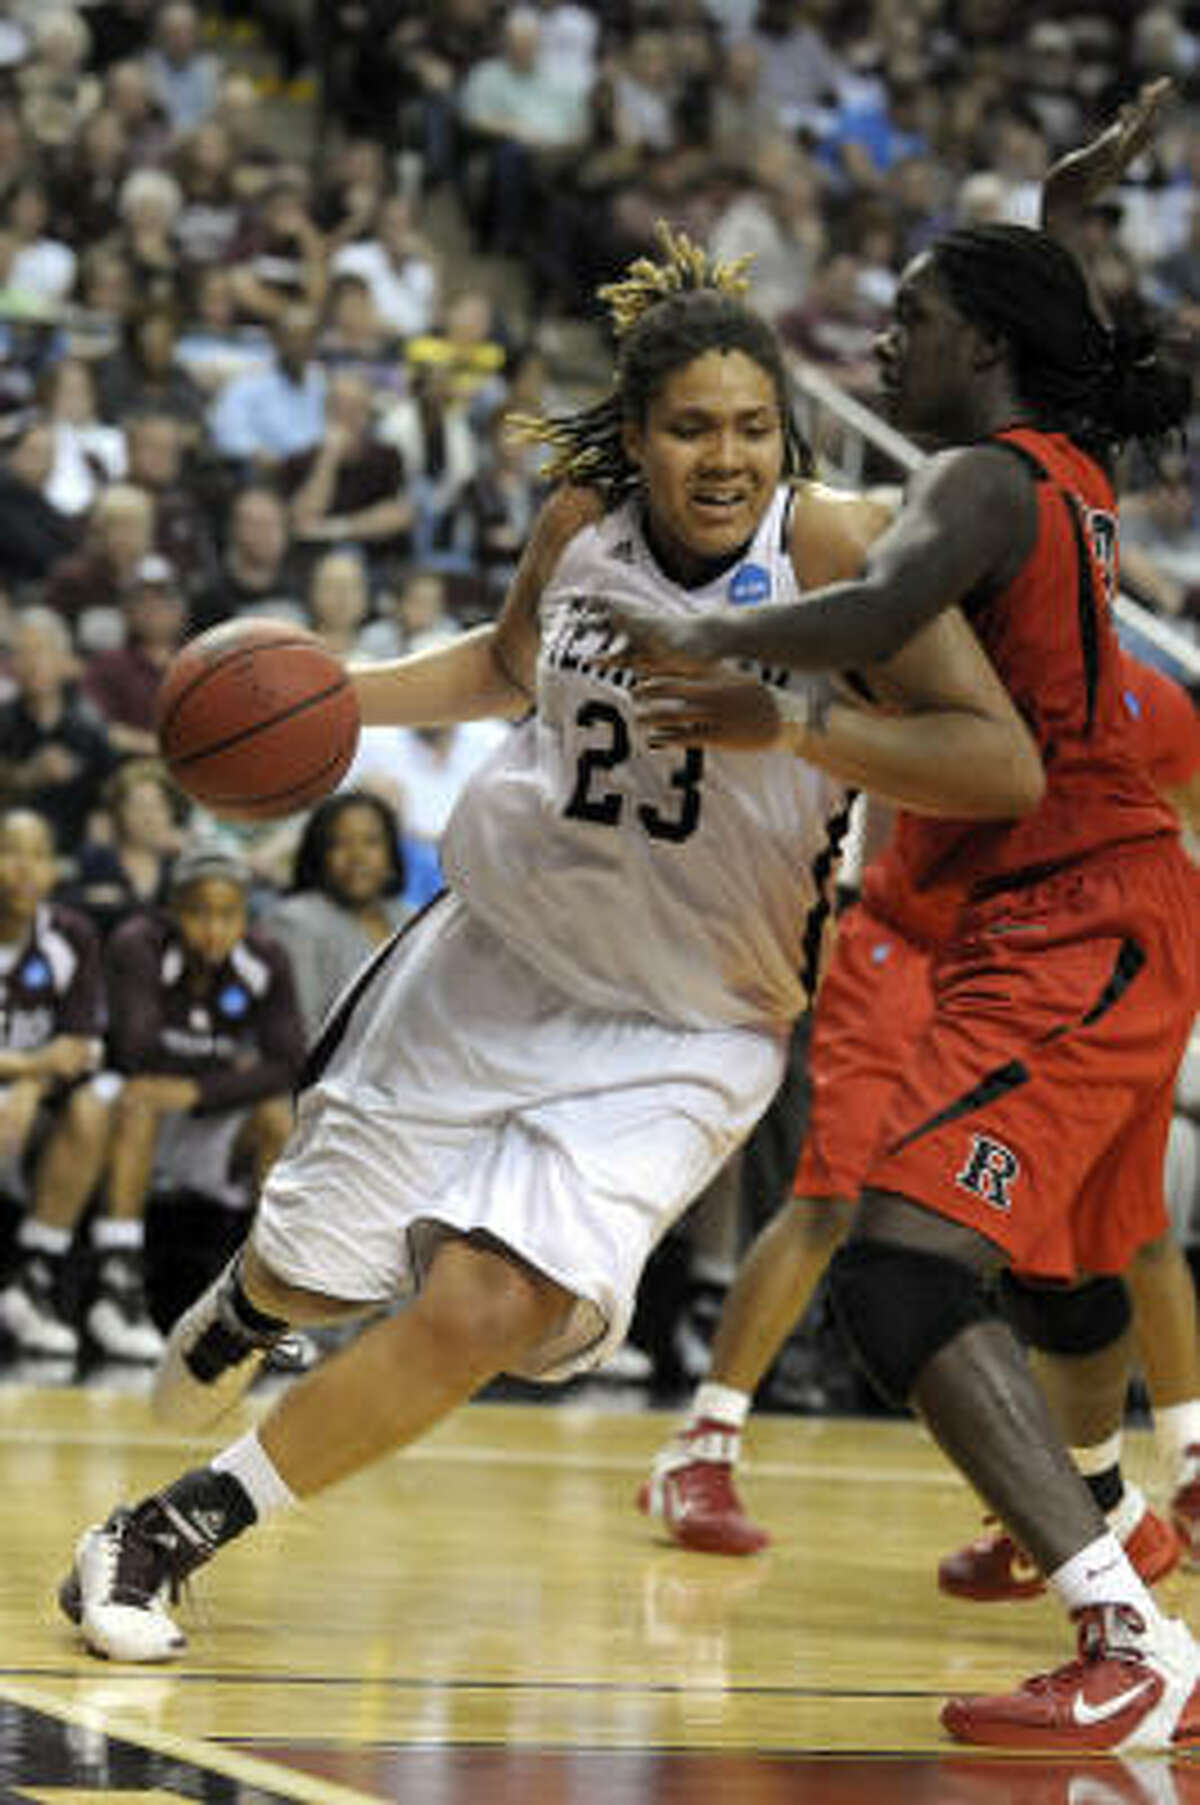 Texas A&M's Danielle Adams scored 28 points to lead the Aggies to the Sweet 16.